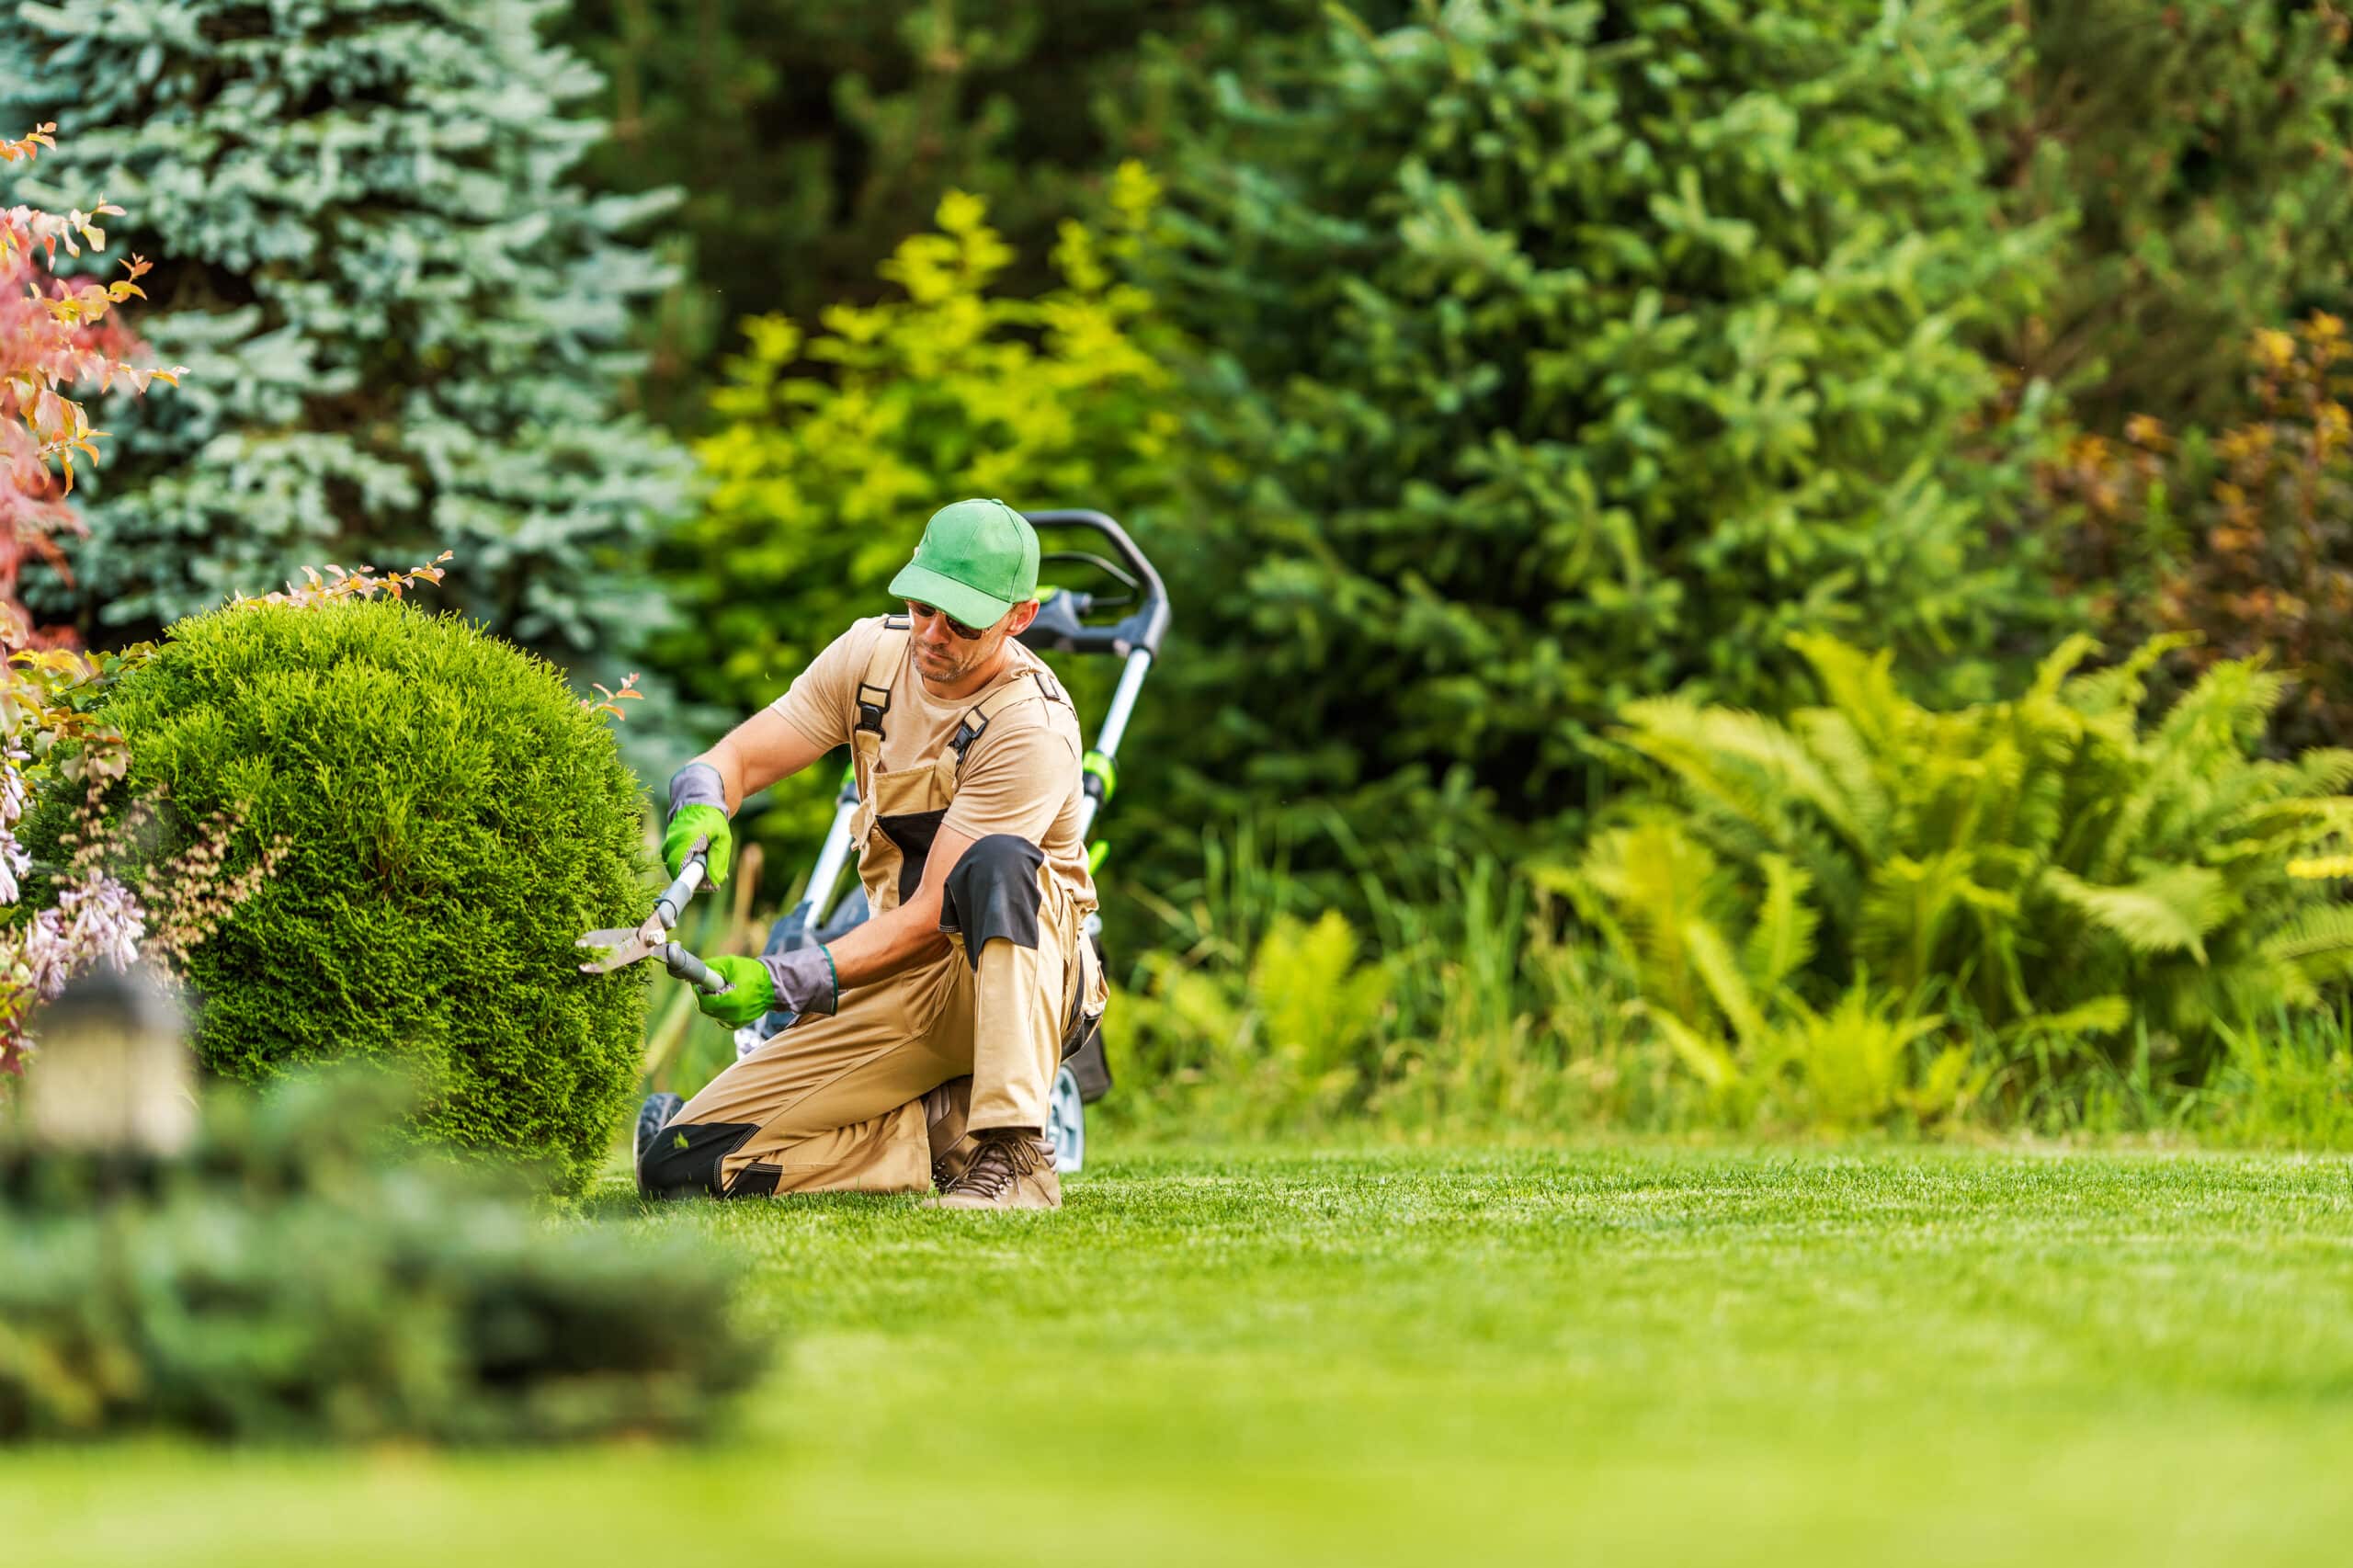 5 Landscaping Tips That Act As Natural Pest Control Services 2 | landscape gardening professional shaping shrub 2023 03 13 23 35 11 utc scaled